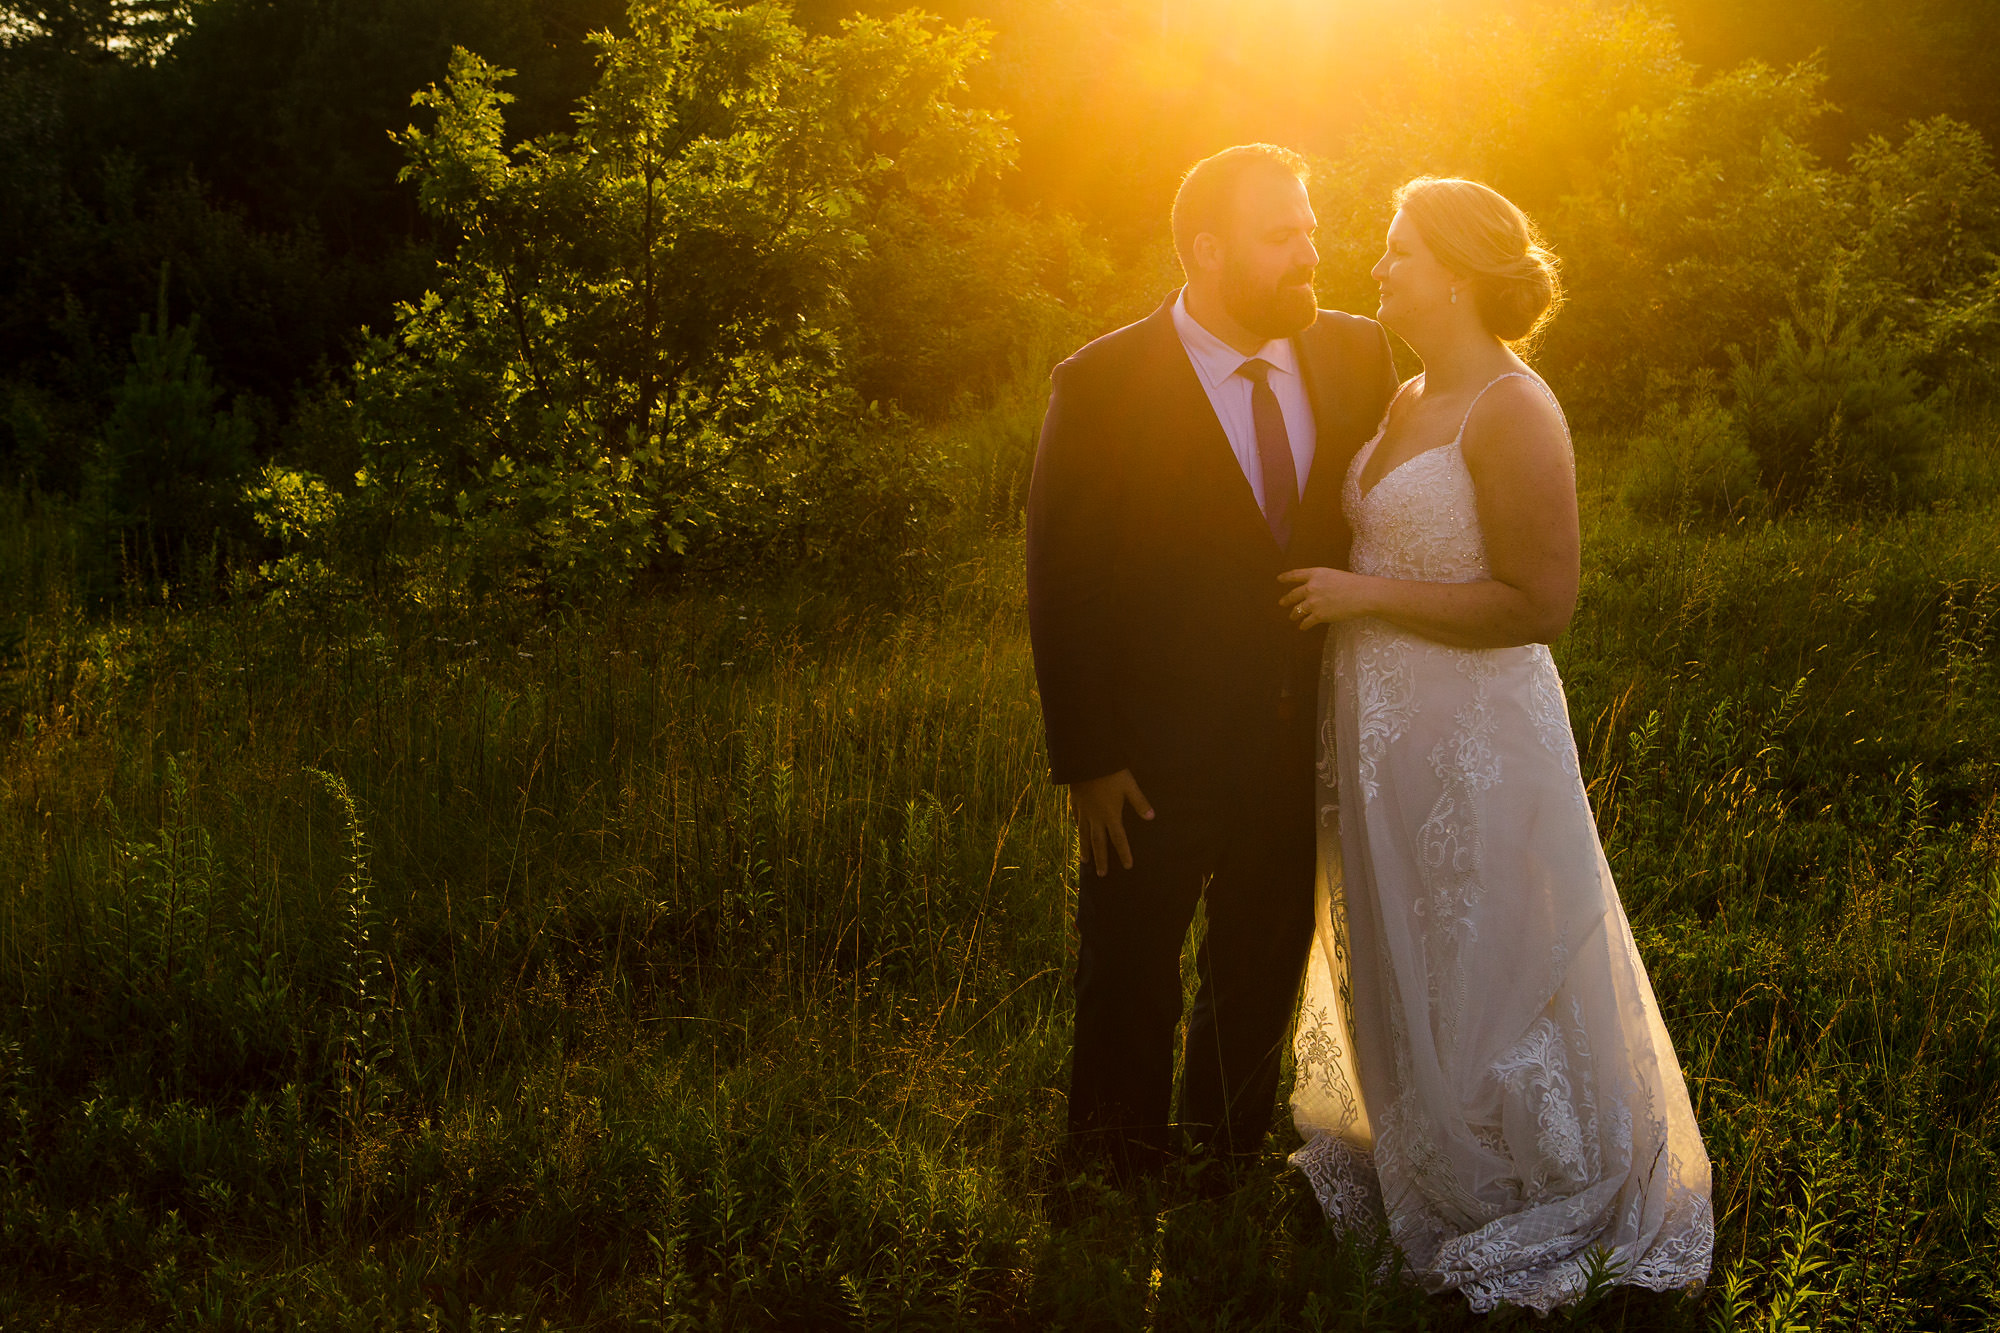 The bride and groom take couples portraits at sunset at French's Point